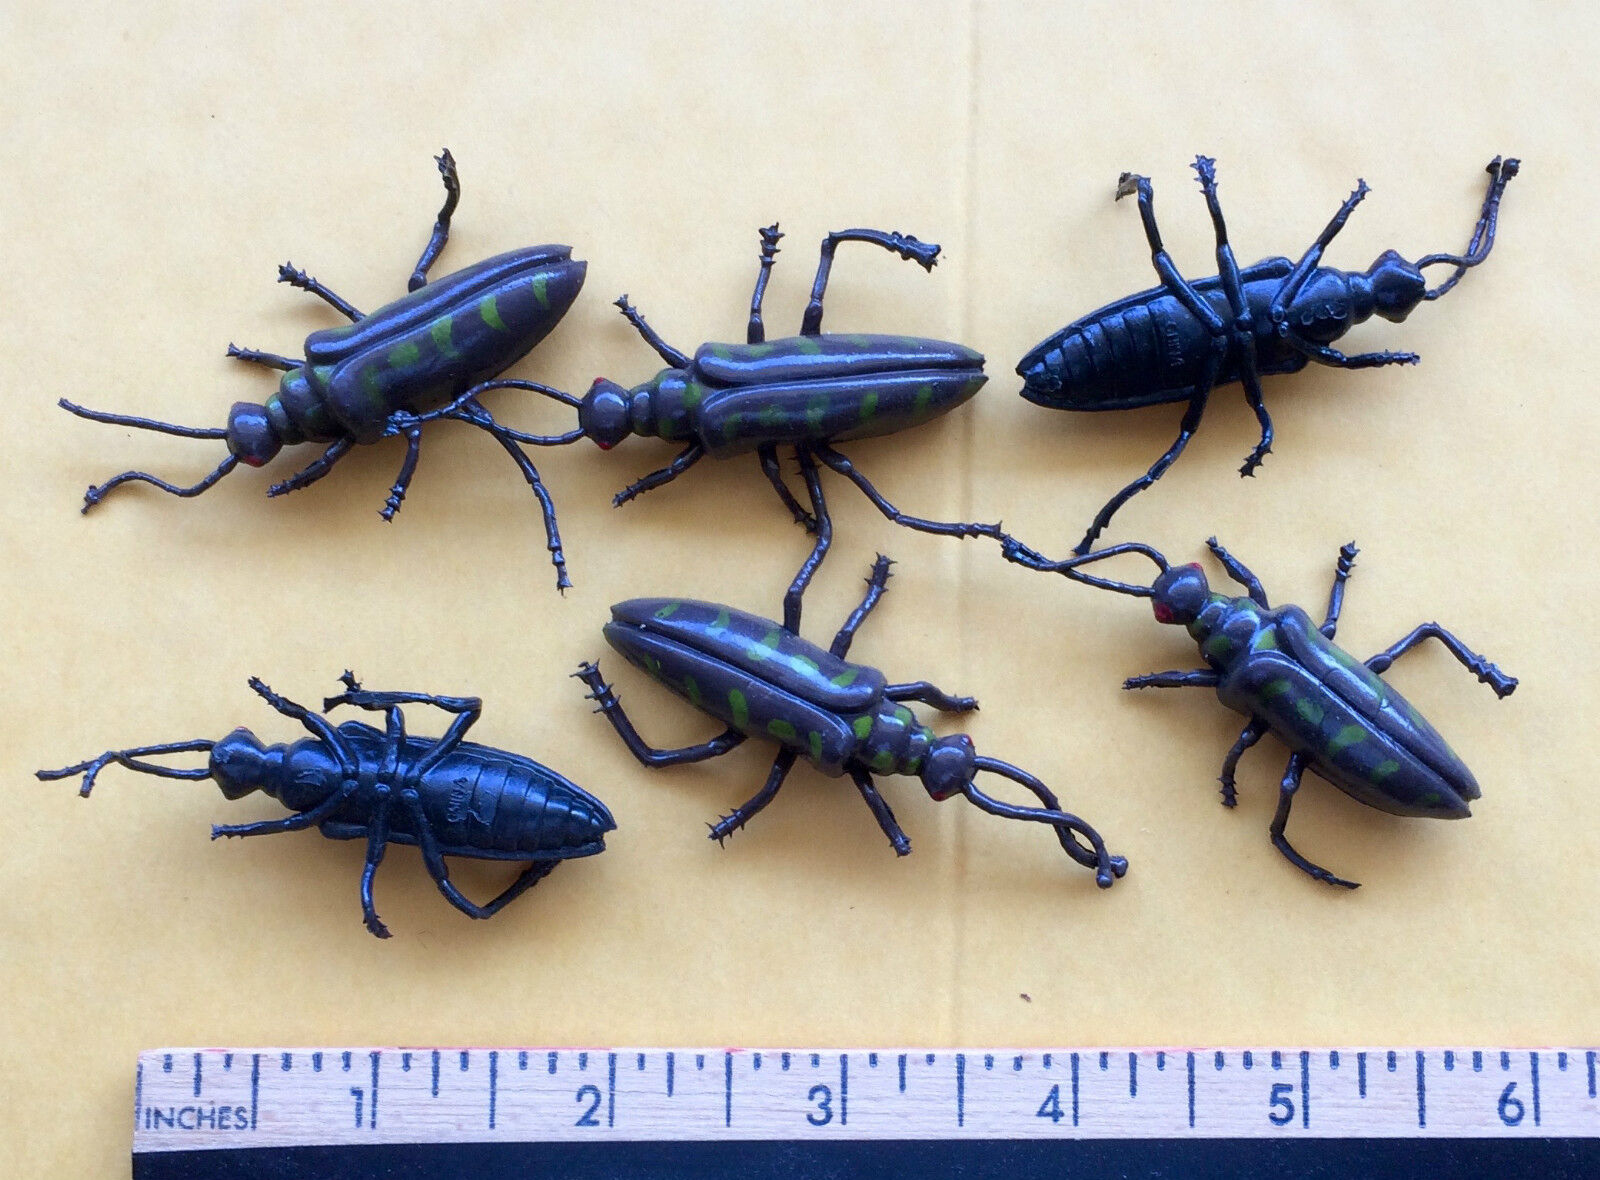  Six (6) Rubberized SPECIAL BEETLES Insects Nice UNIQUE, RARE & REALISTIC L@@K